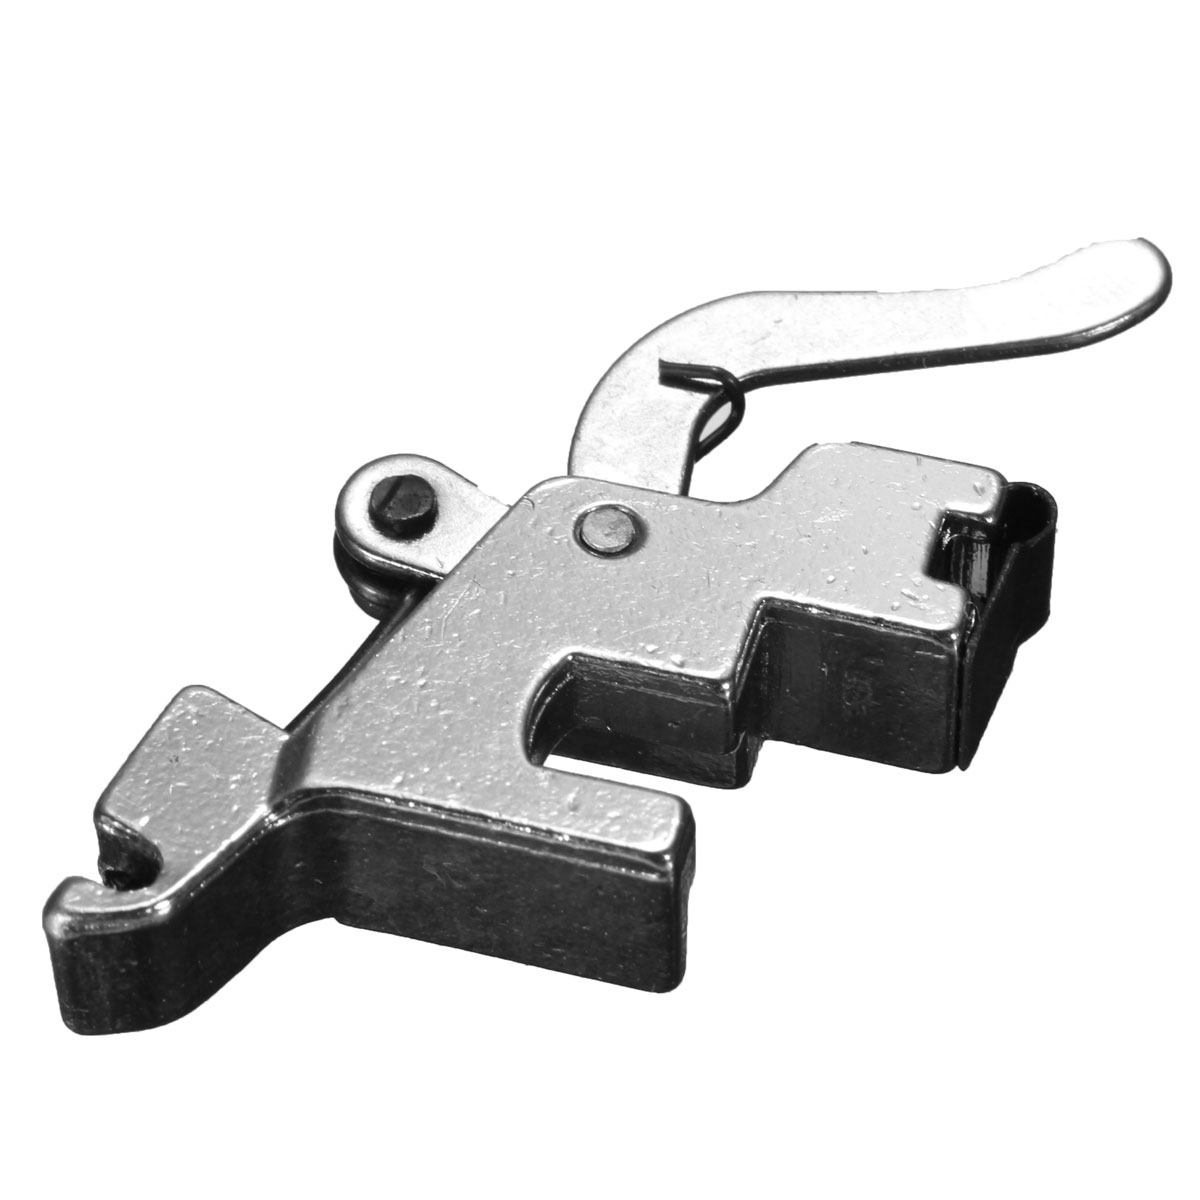 Stainless-Steel-Presser-Foot-Holder-Replacement-For-Household-Electric-Sewing-Machine-1017923